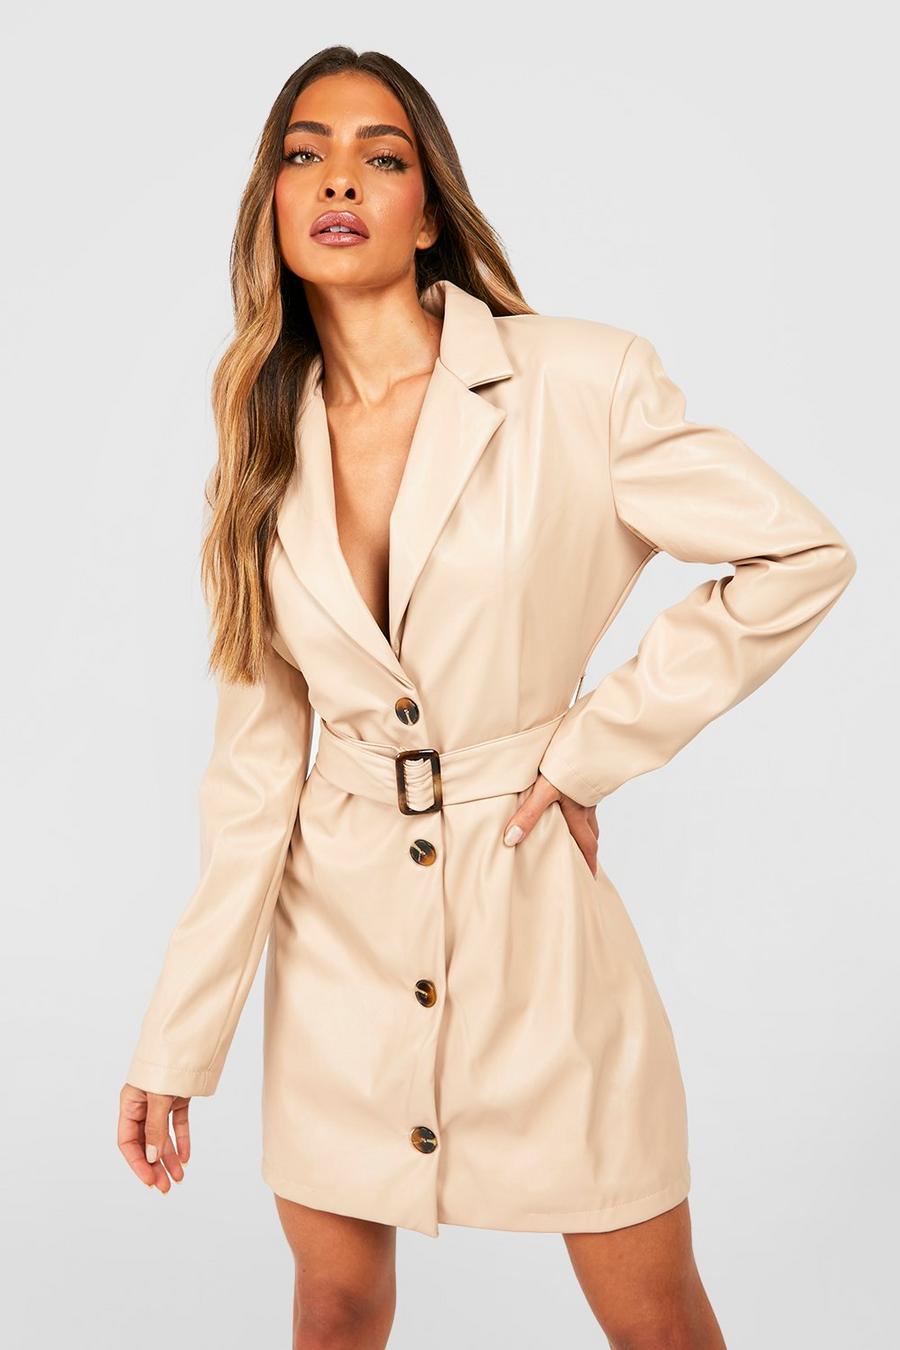 Nude Leather Look Belted Tailored Blazer Dress